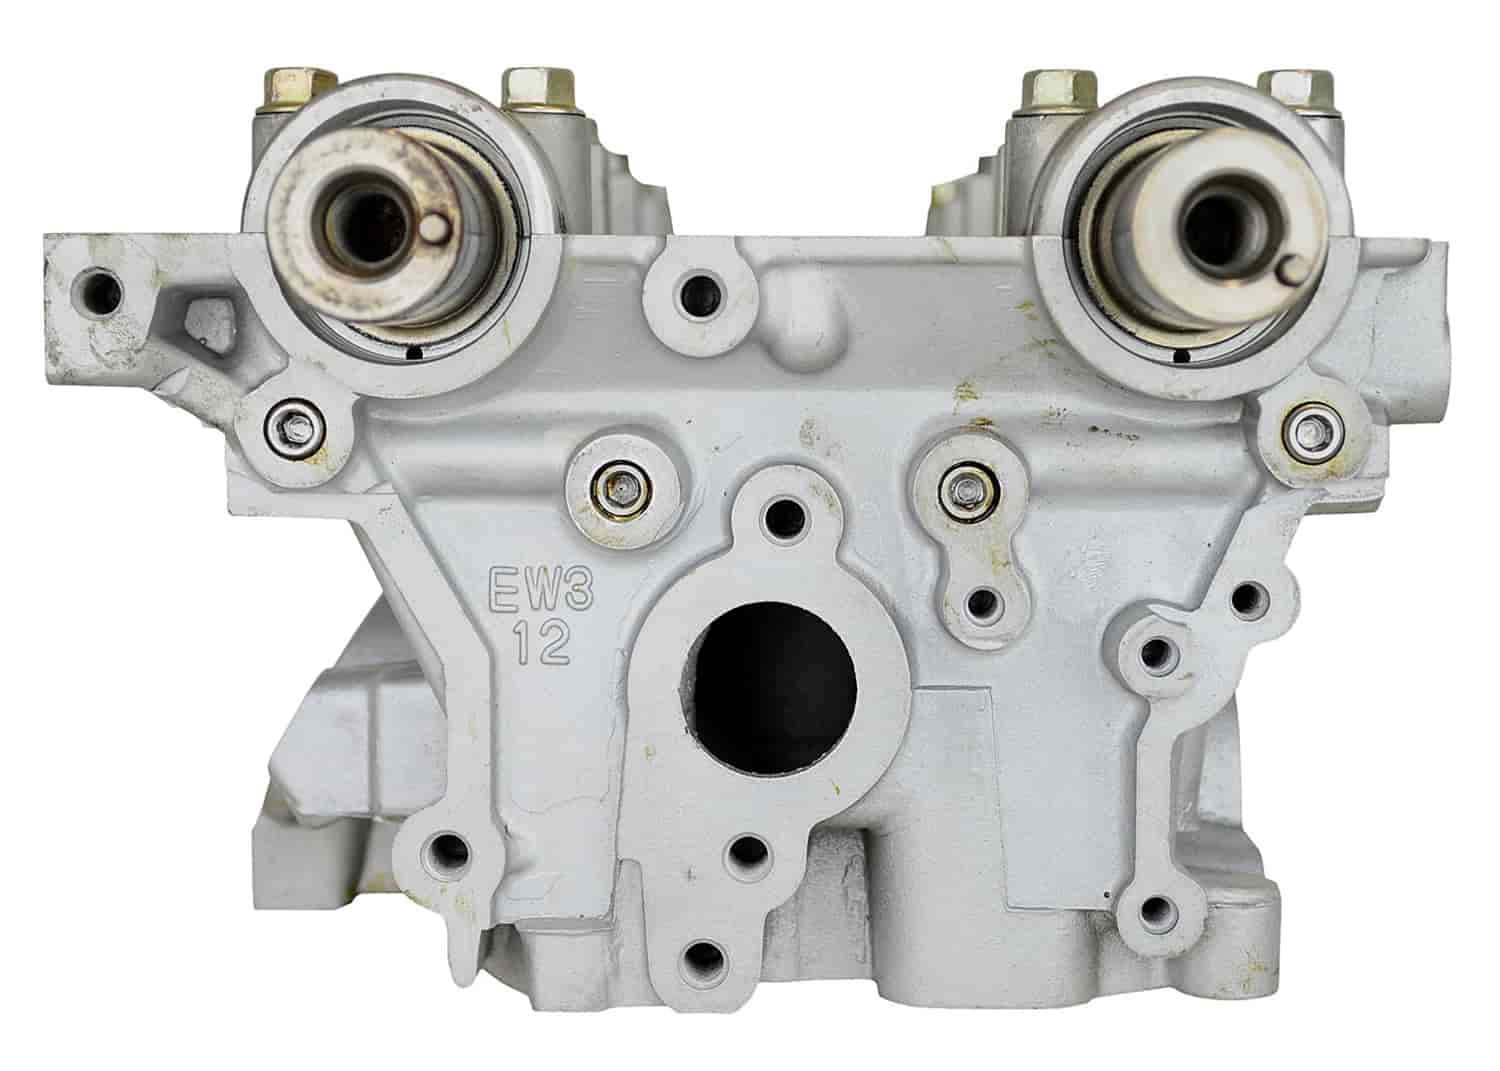 Remanufactured Cylinder Head for 2002-2006 Hyundai/Kia with 3.5L V6